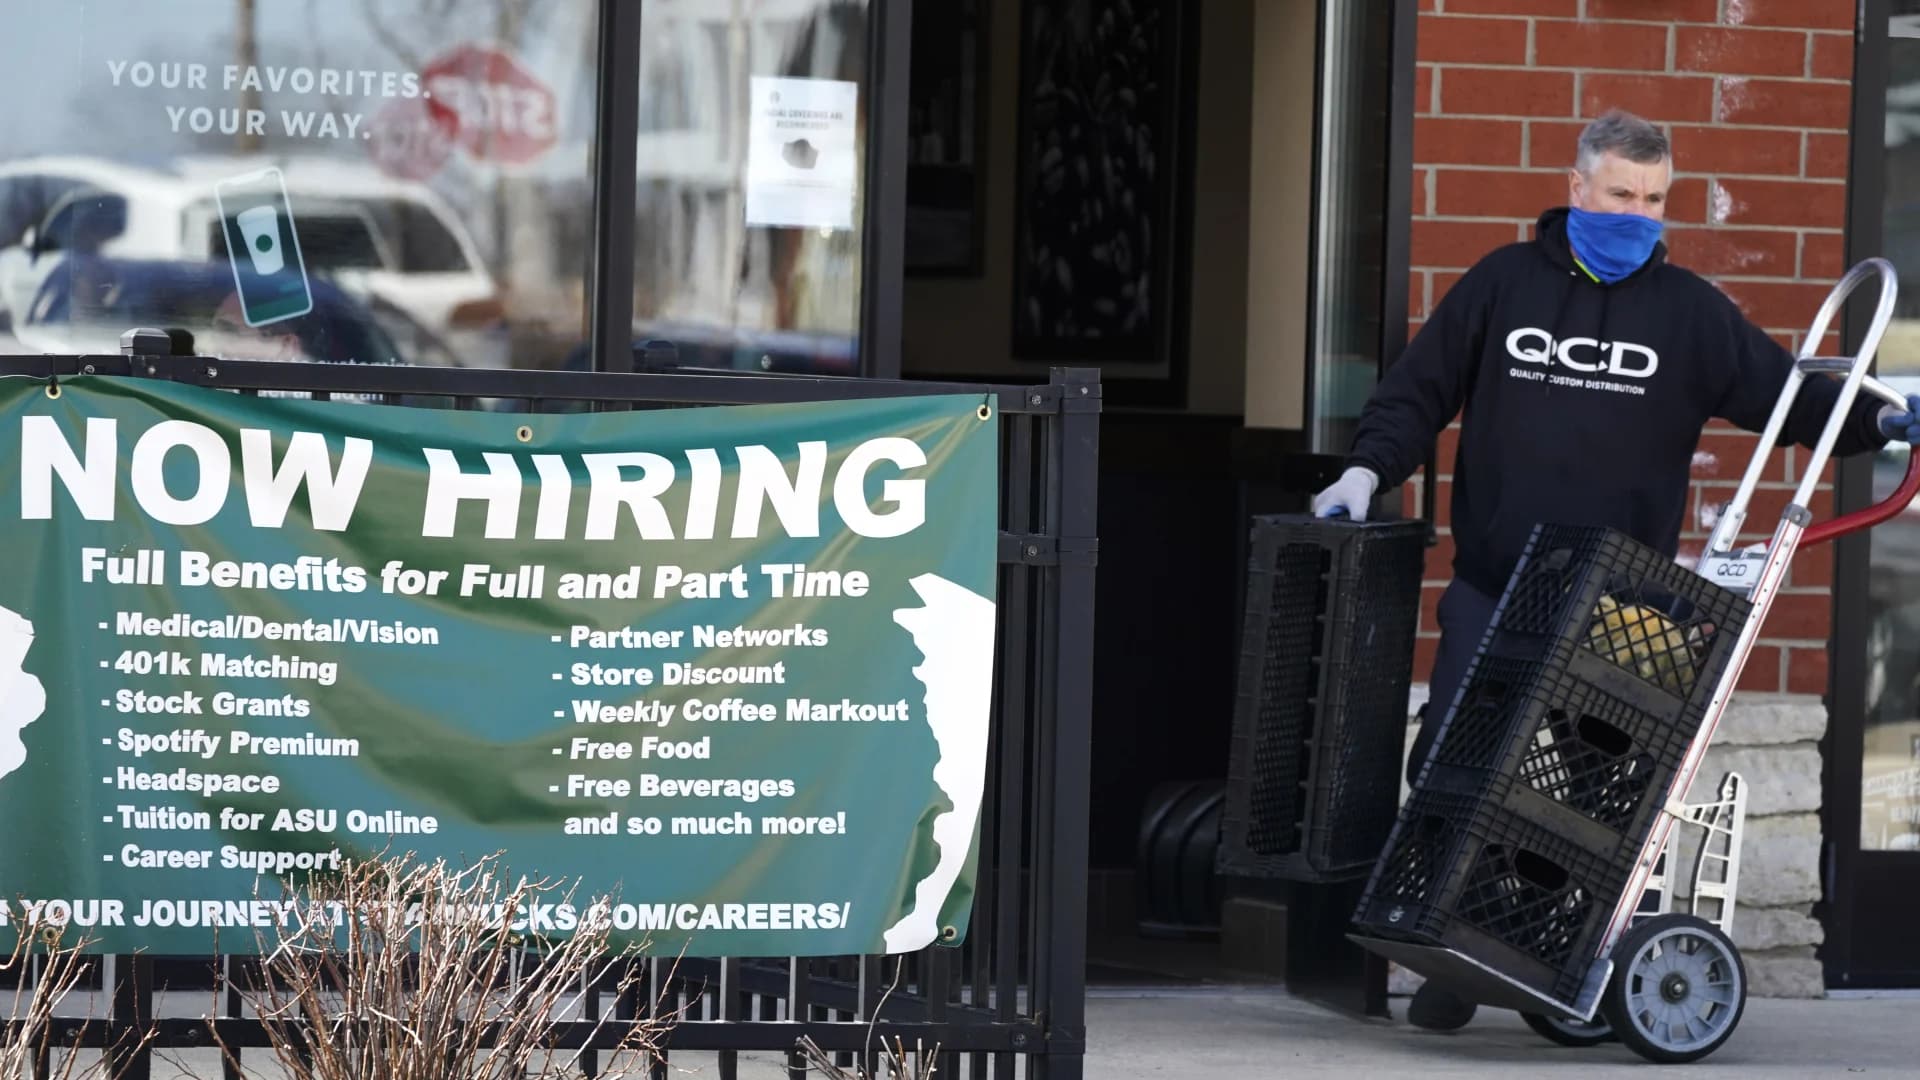 US job openings decline from record level but remain high